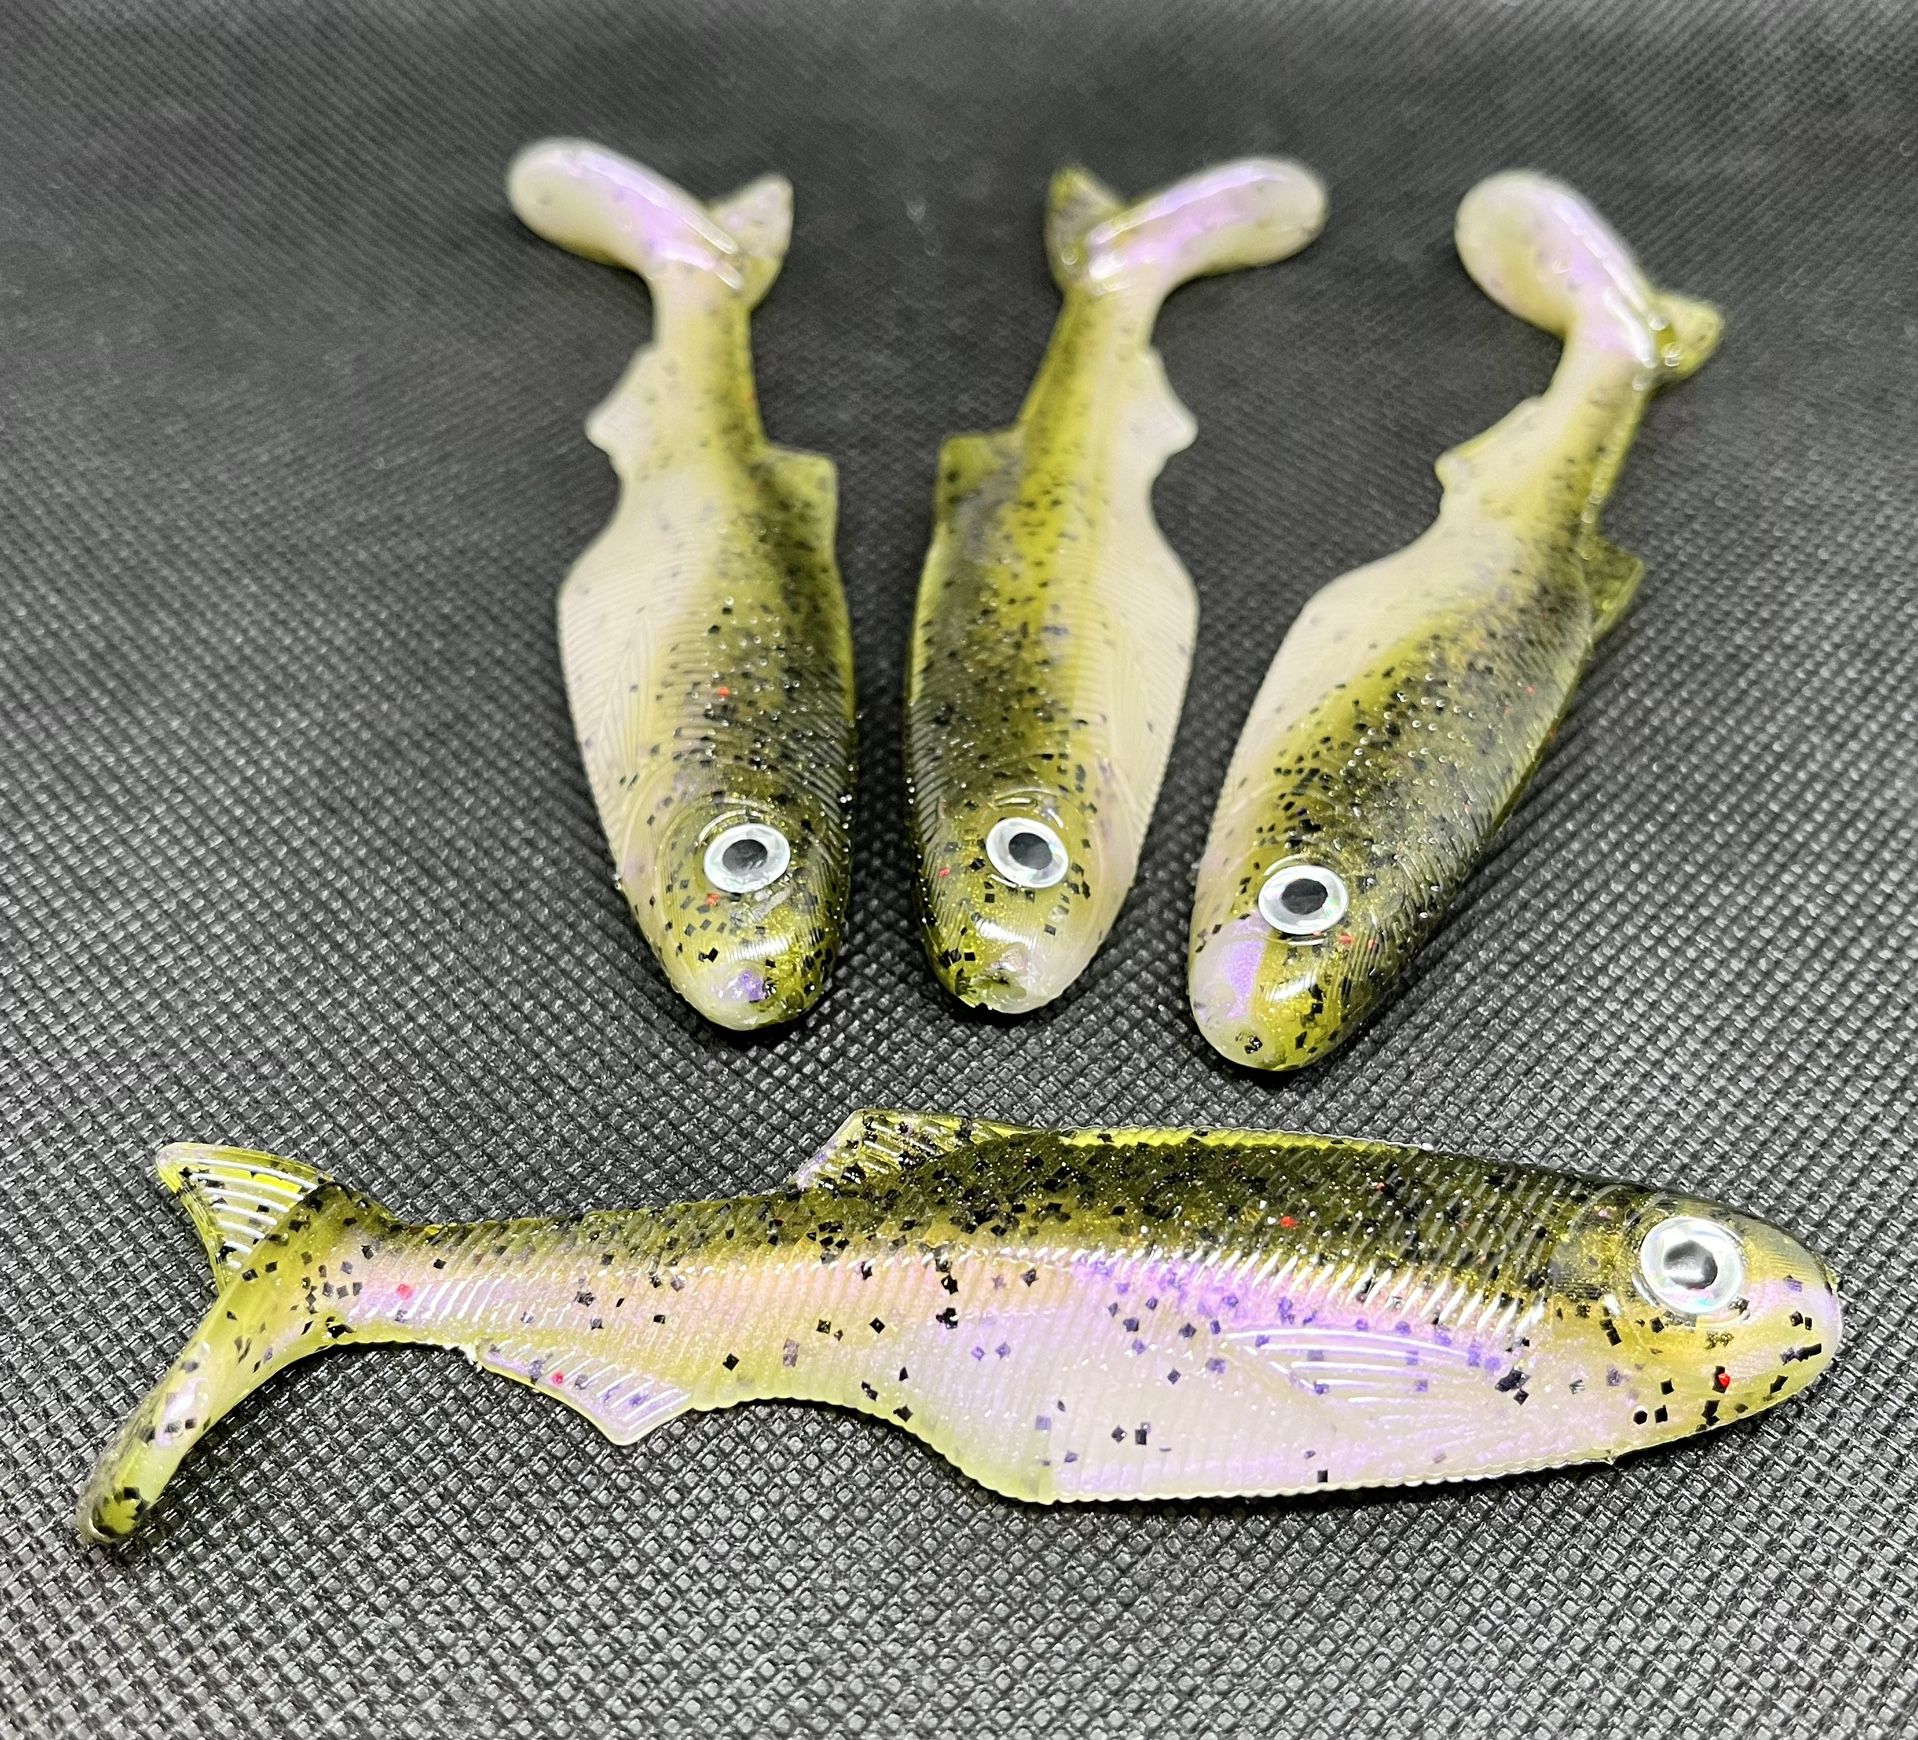 Fishing 4.1 Inch Epic Preybait Lure 4 Pack